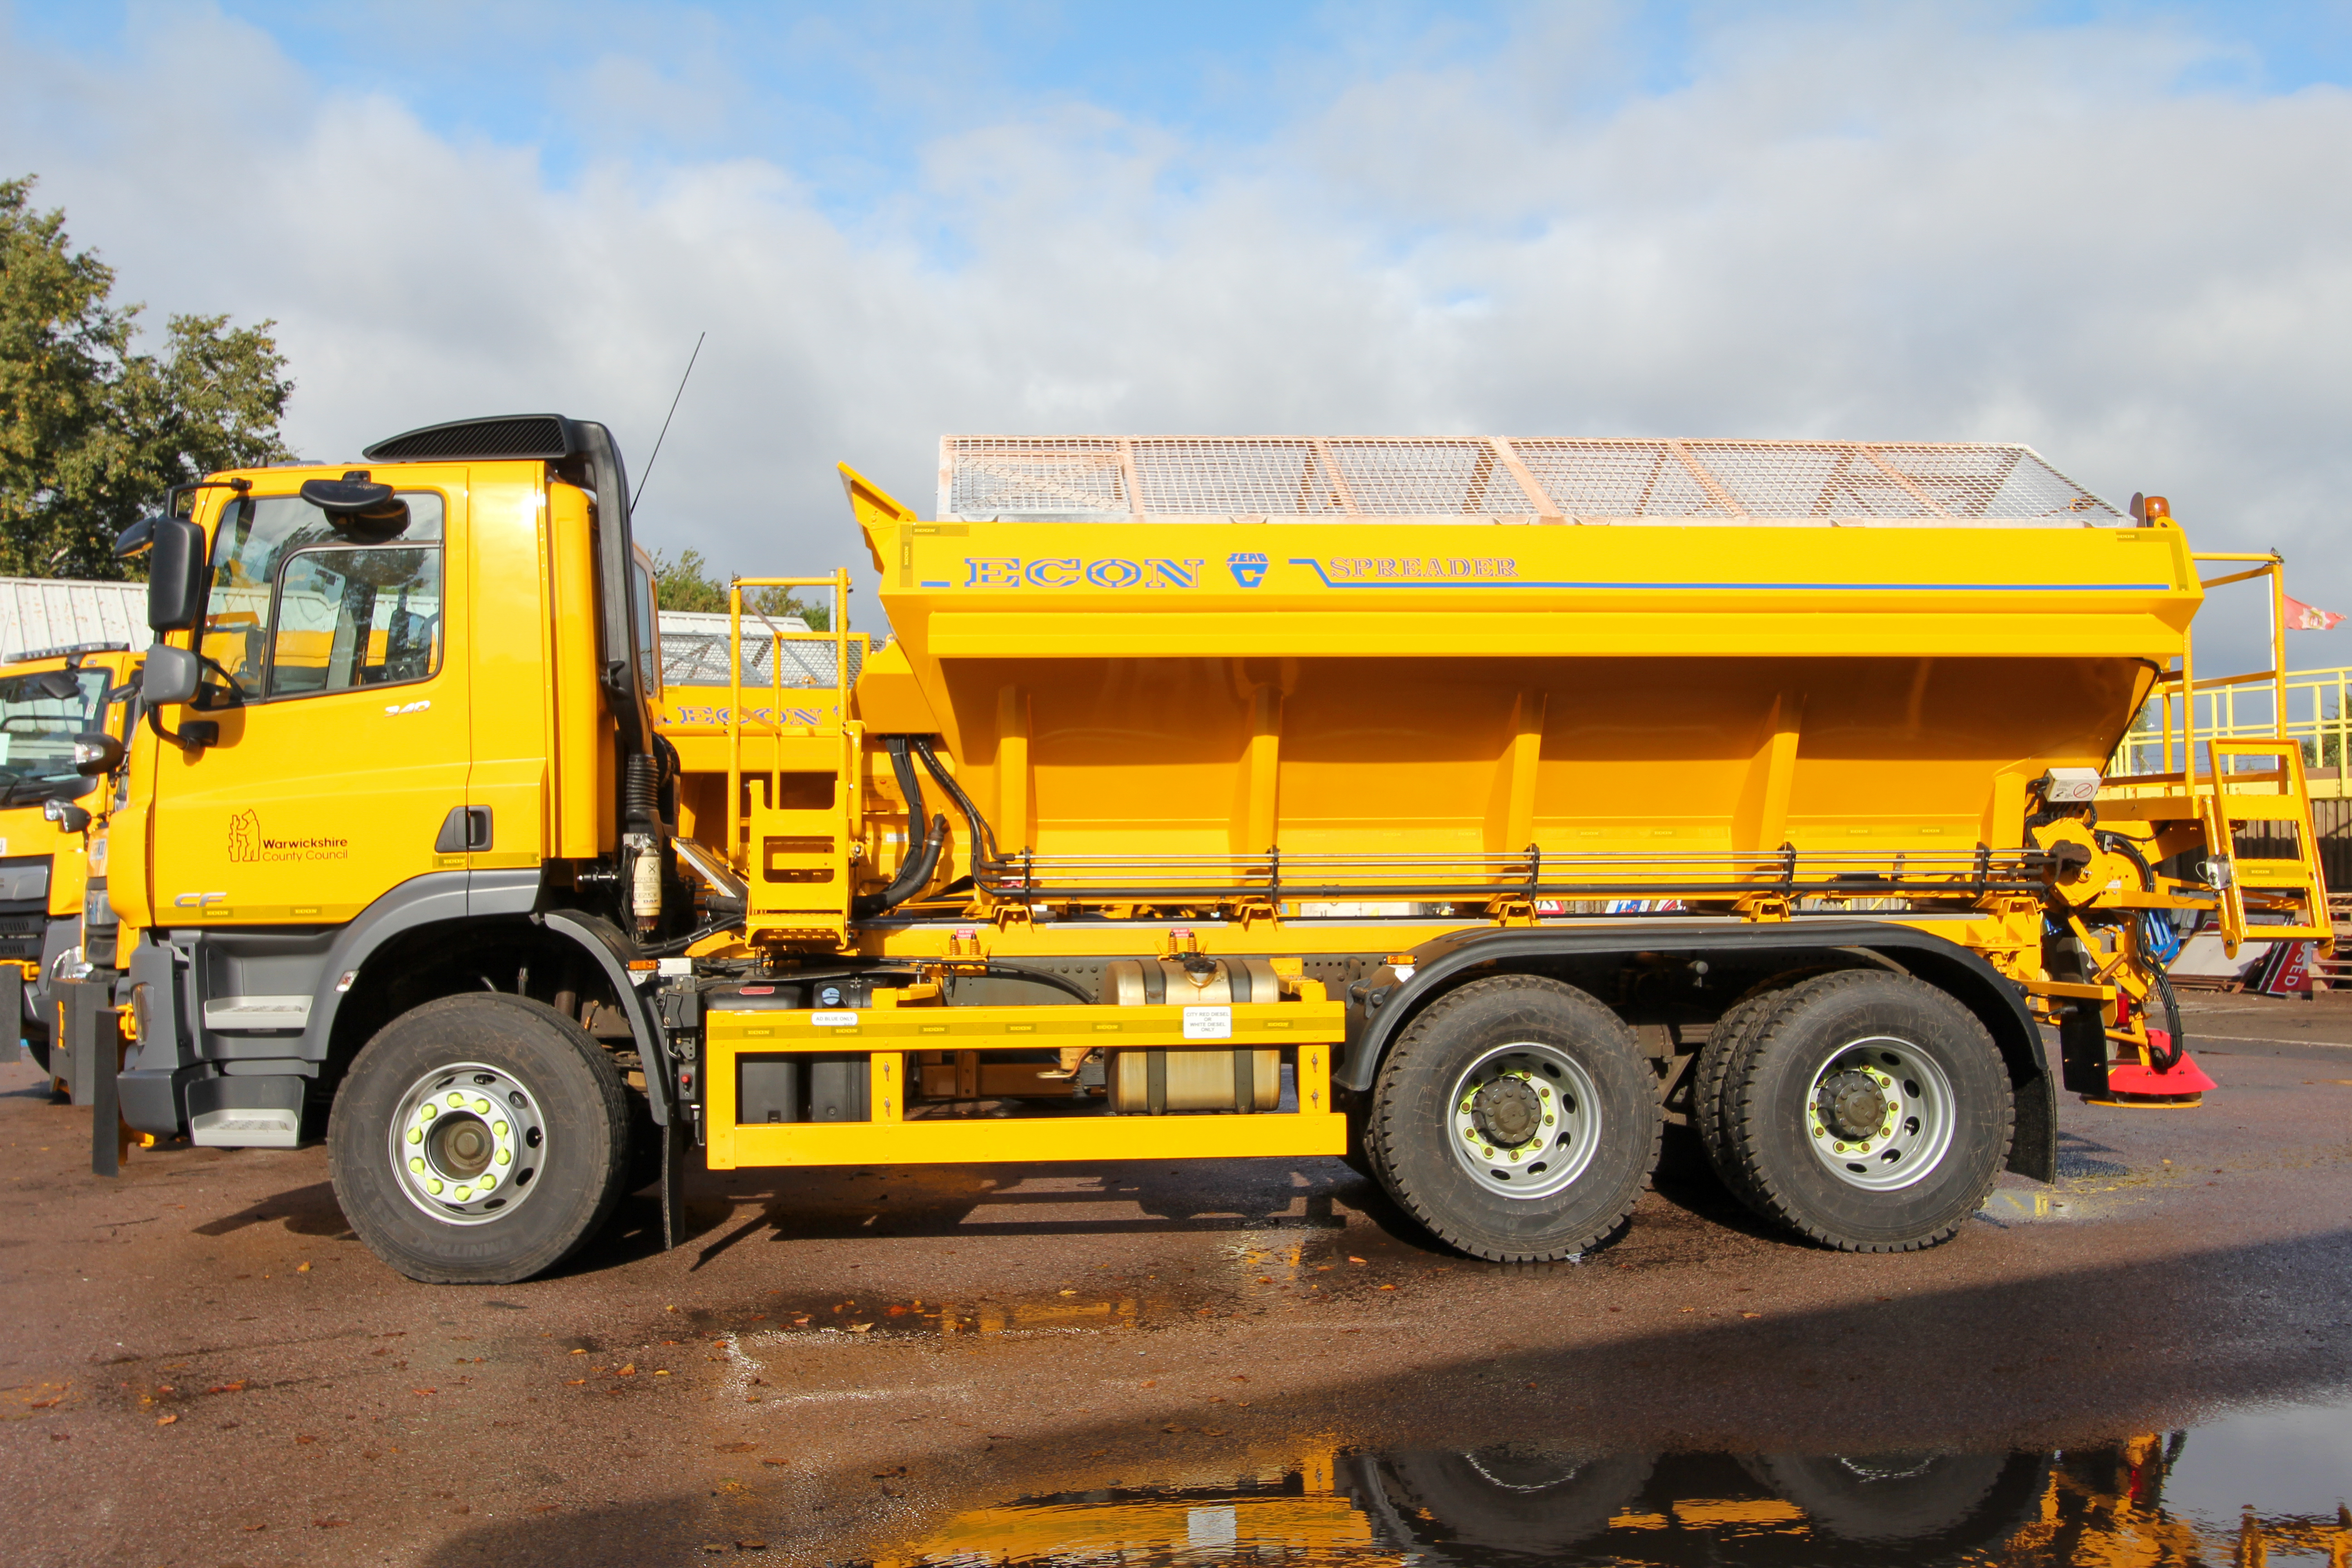 One of Warwickshire's New Gritters